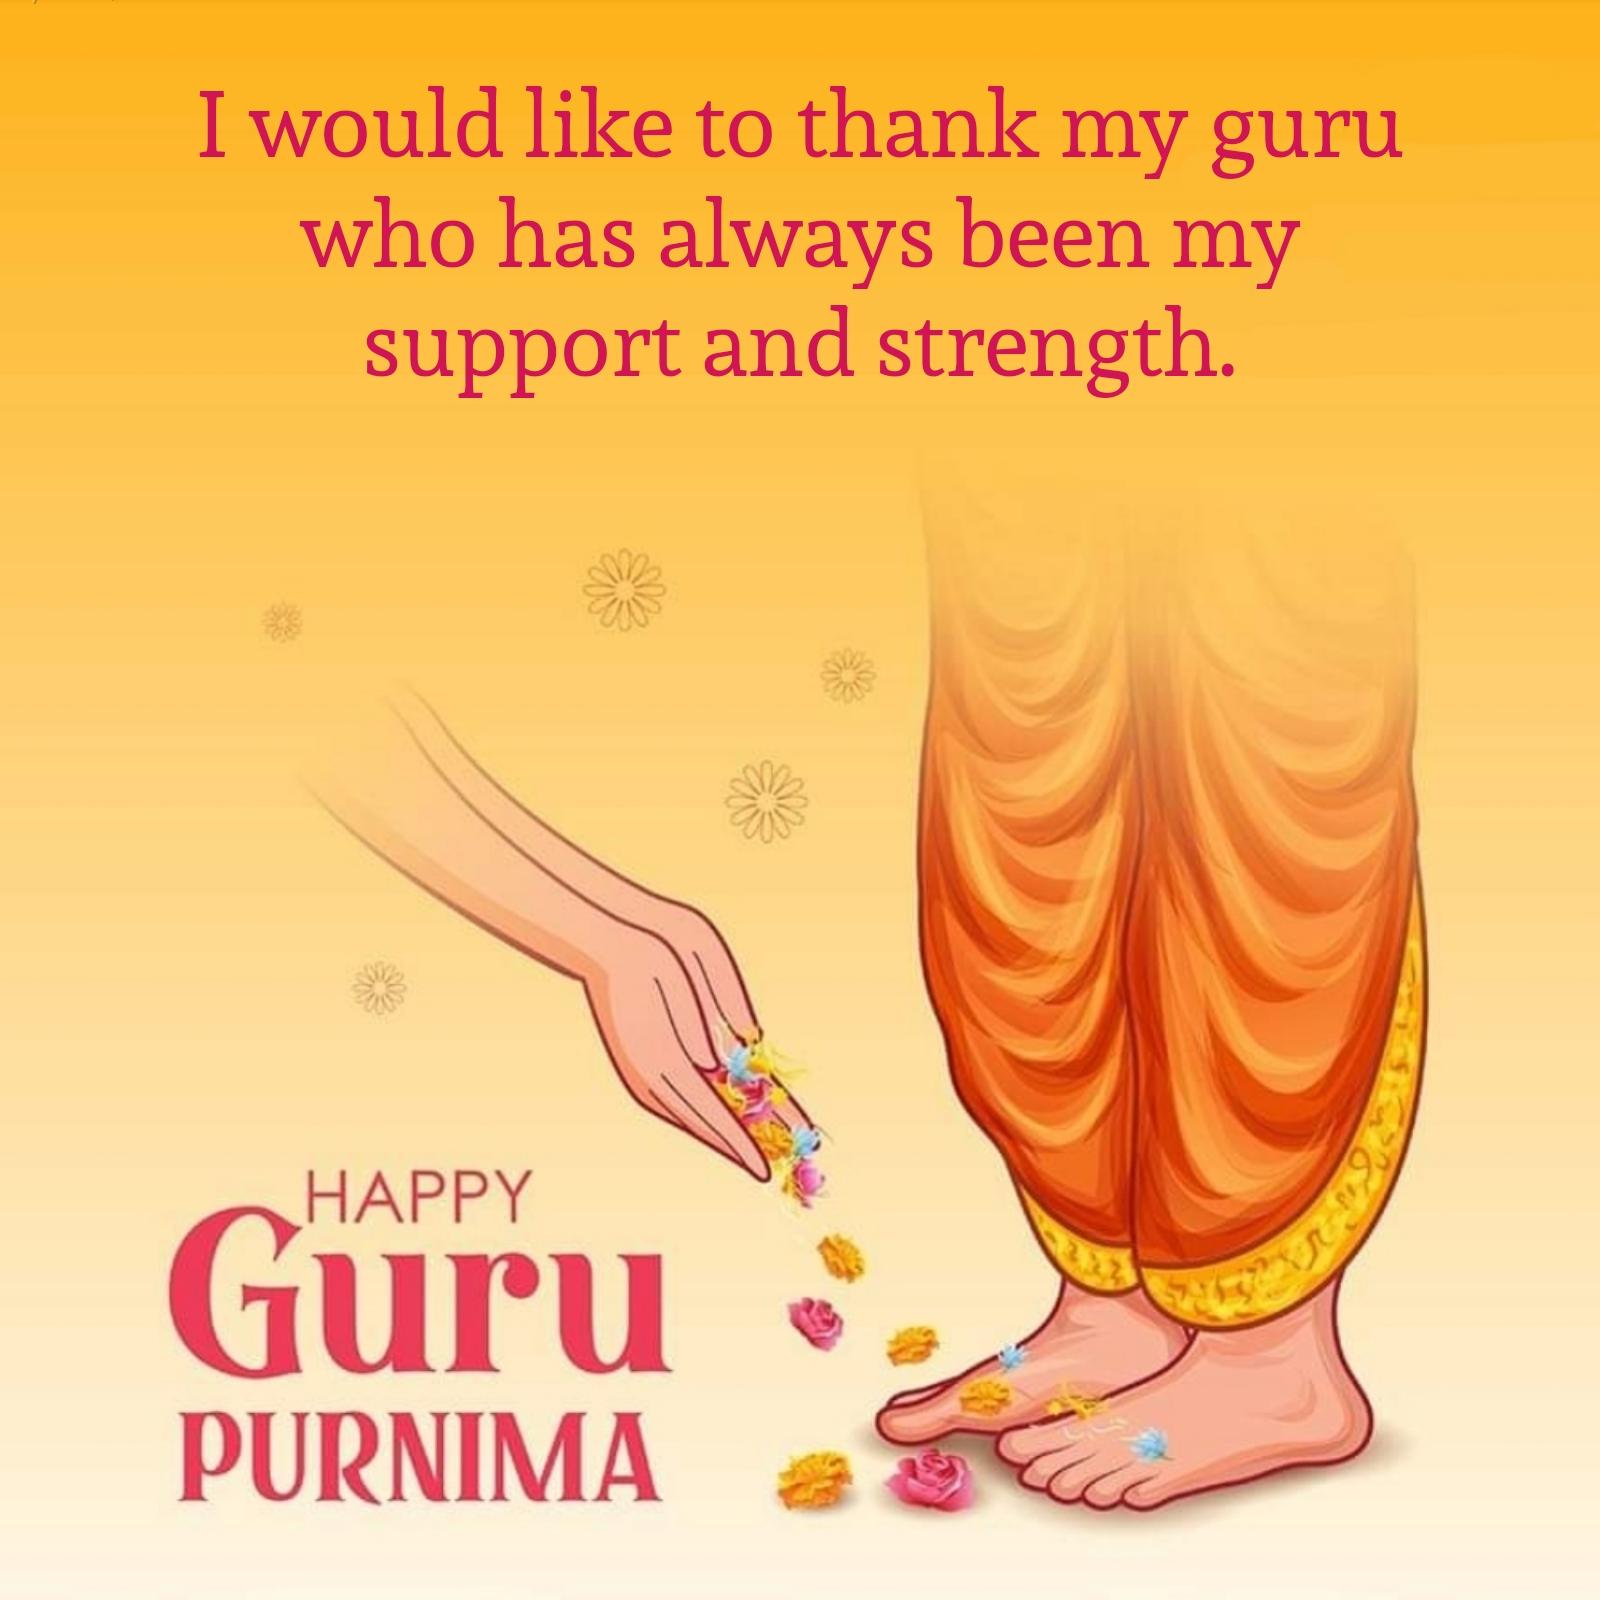 I would like to thank my guru who has always been my support